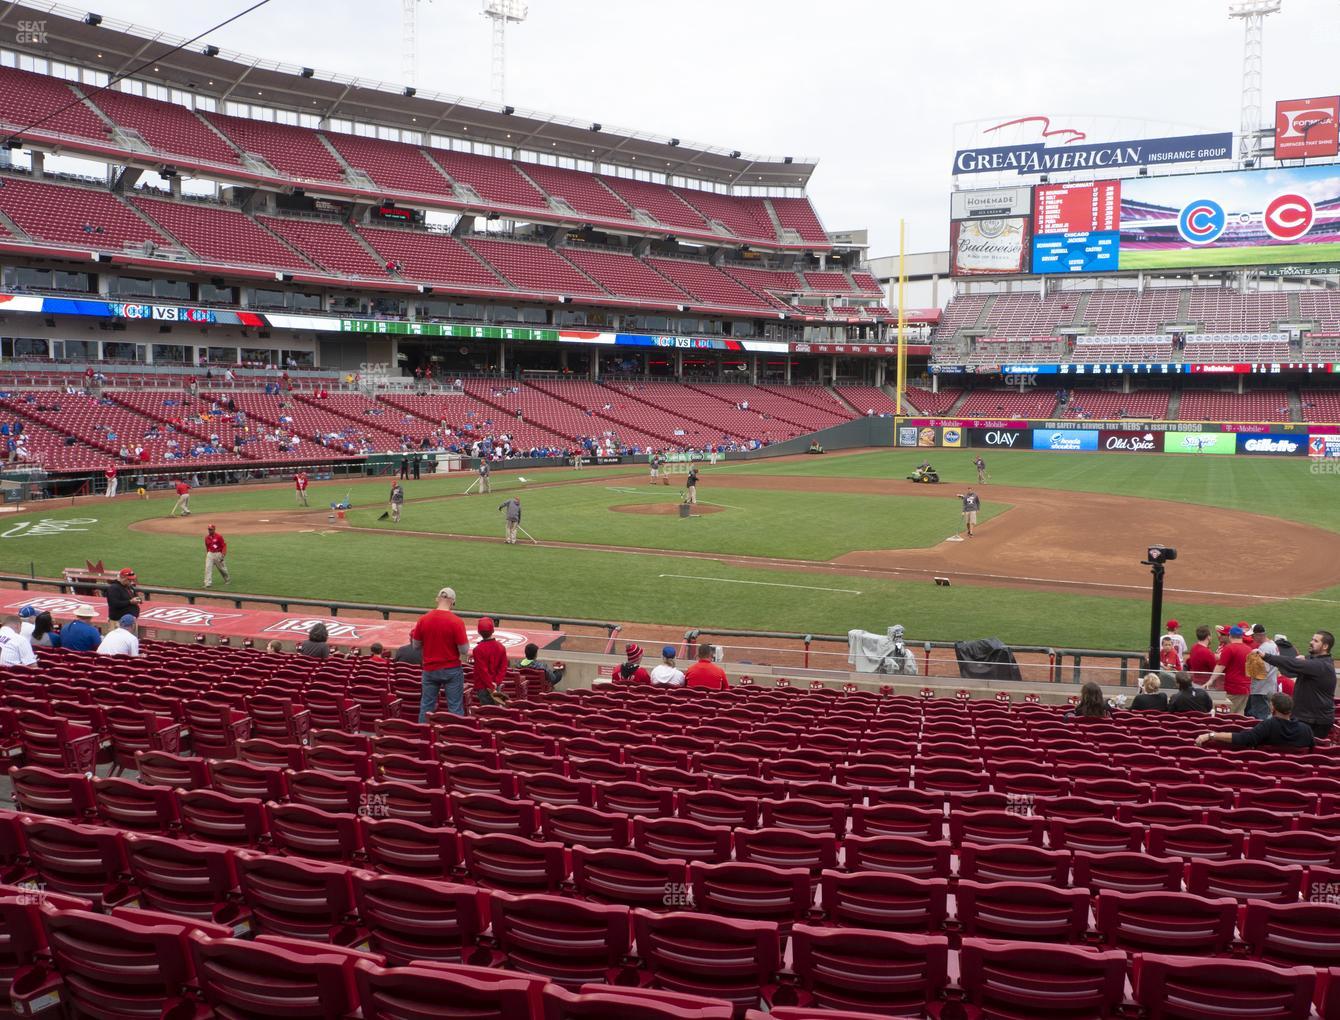 Gabp Seating Chart With Rows